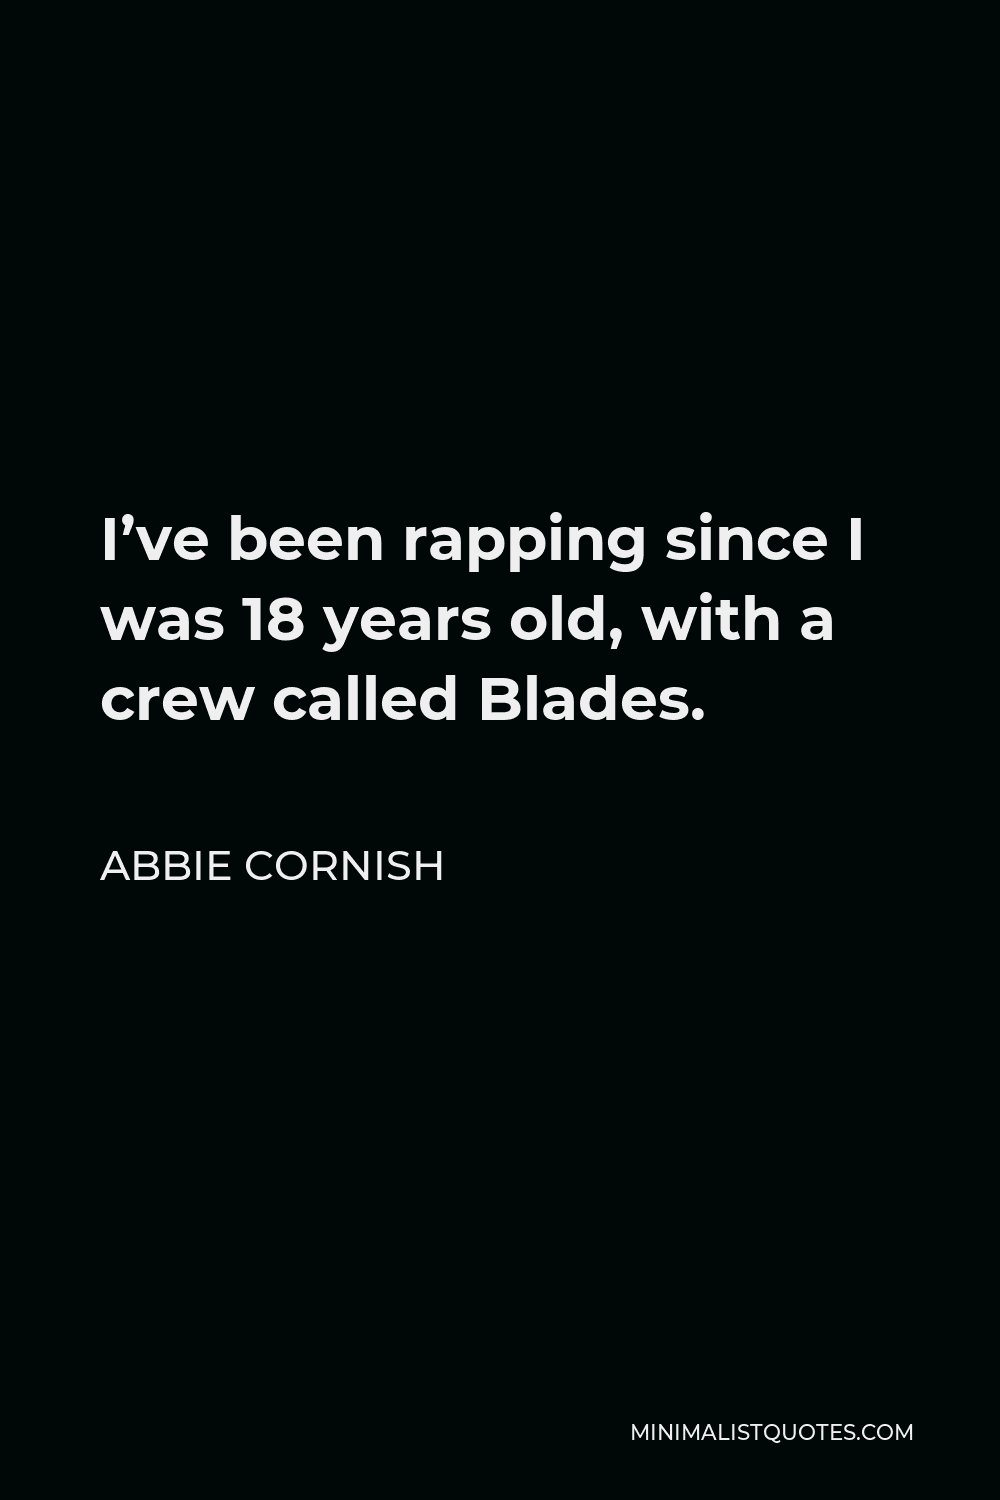 Abbie Cornish Quote - I’ve been rapping since I was 18 years old, with a crew called Blades.